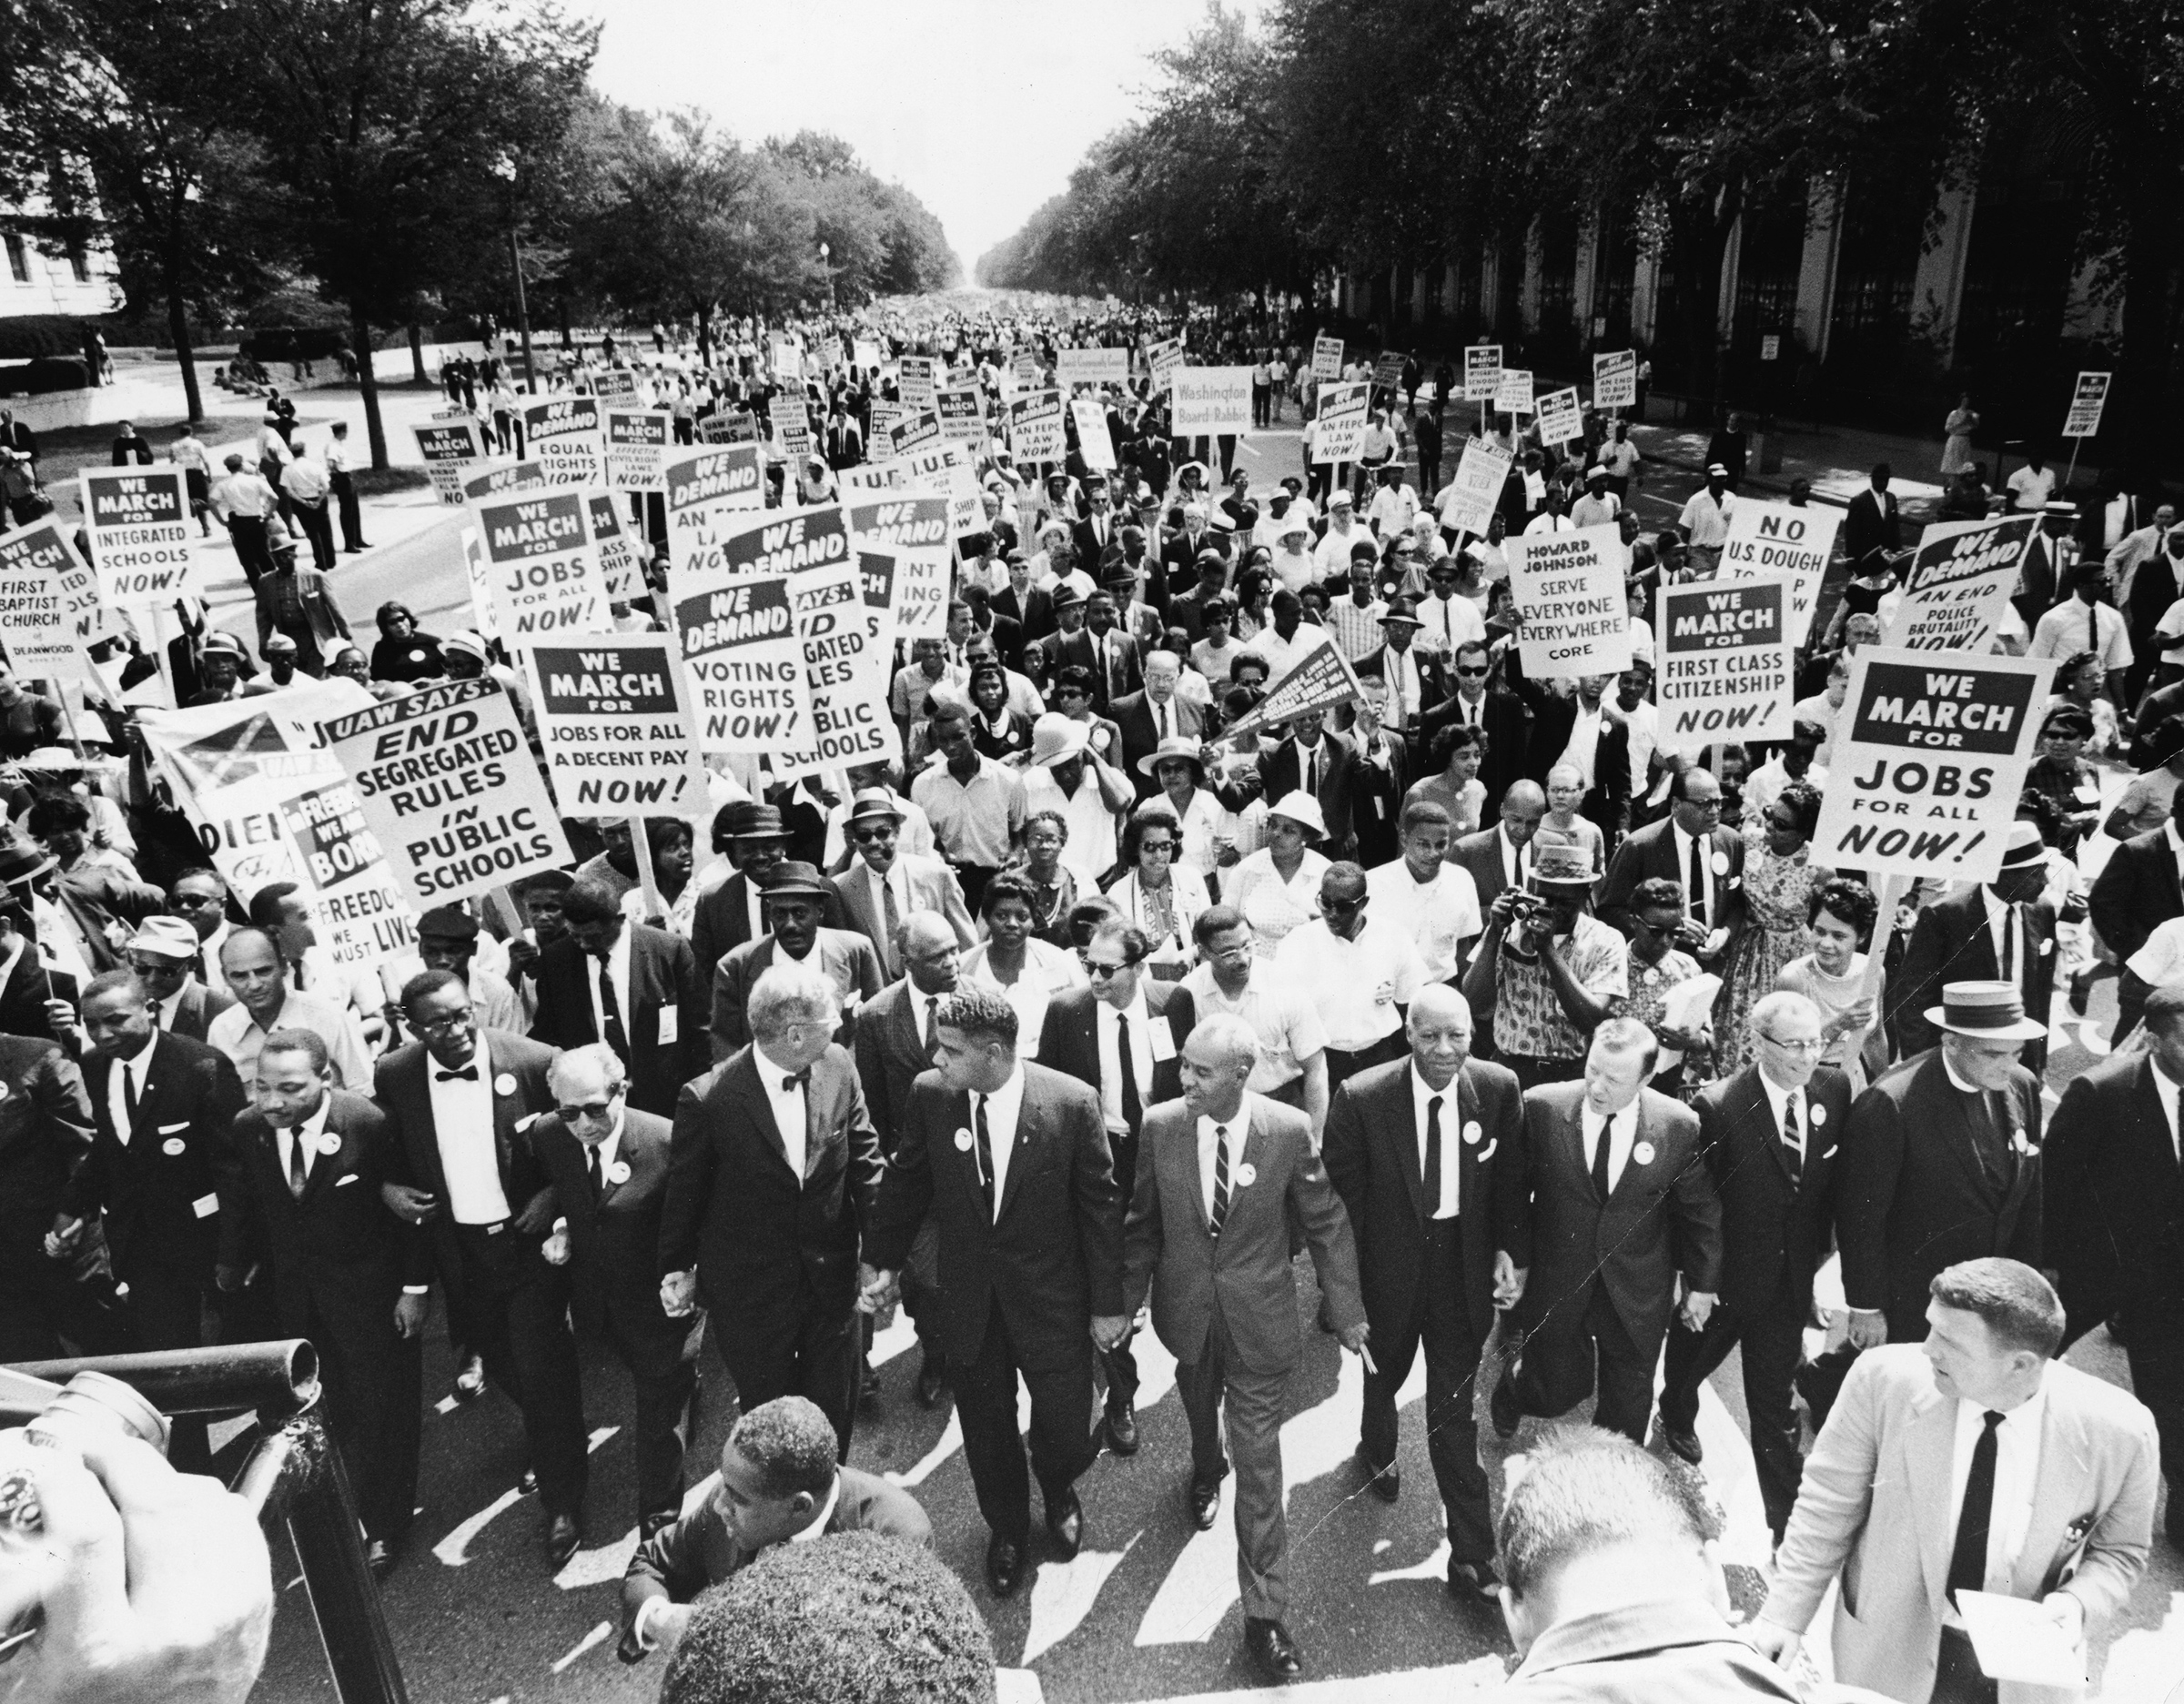 Civil rights leaders including James Meredith, Martin Luther King, Jr., Roy Wilkins, A. Phillip Randolph, and Walther Reuther, hold hands as they lead a crowd at the March on Washington in Washington D.C., Aug. 28, 1963 (Express/Hulton Archive/Getty Images)